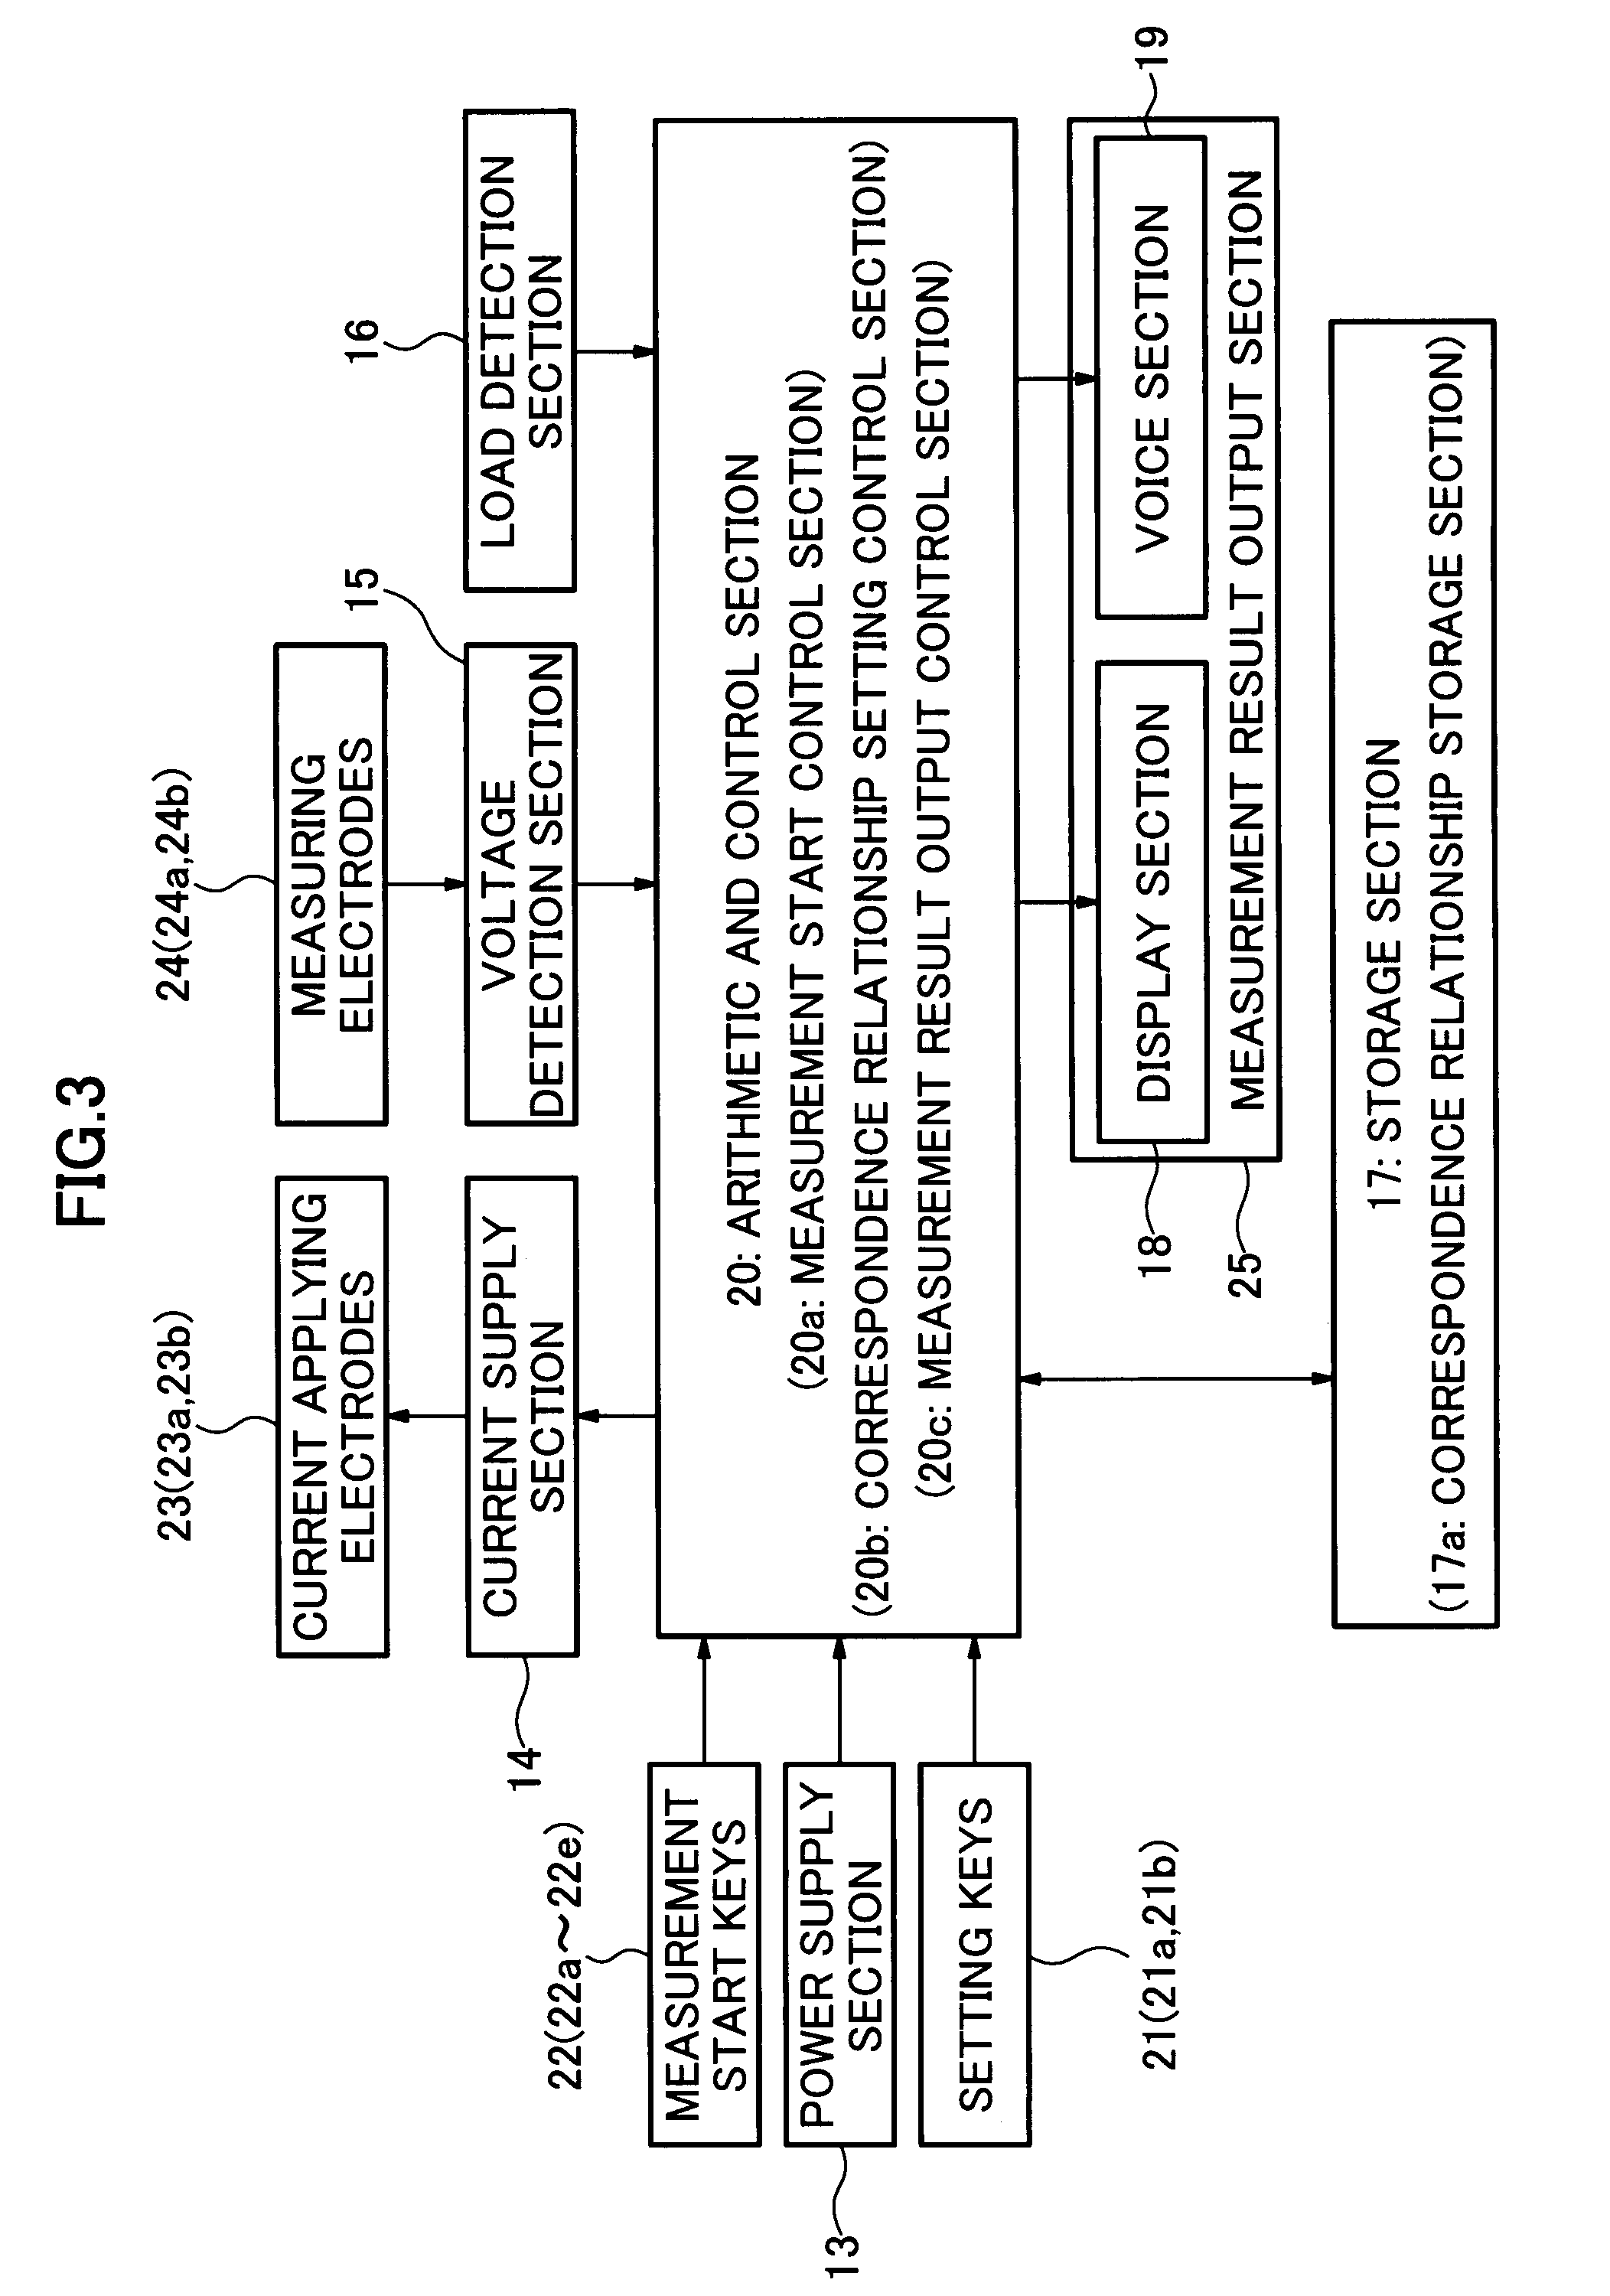 Body measuring device having individual output format customization feature